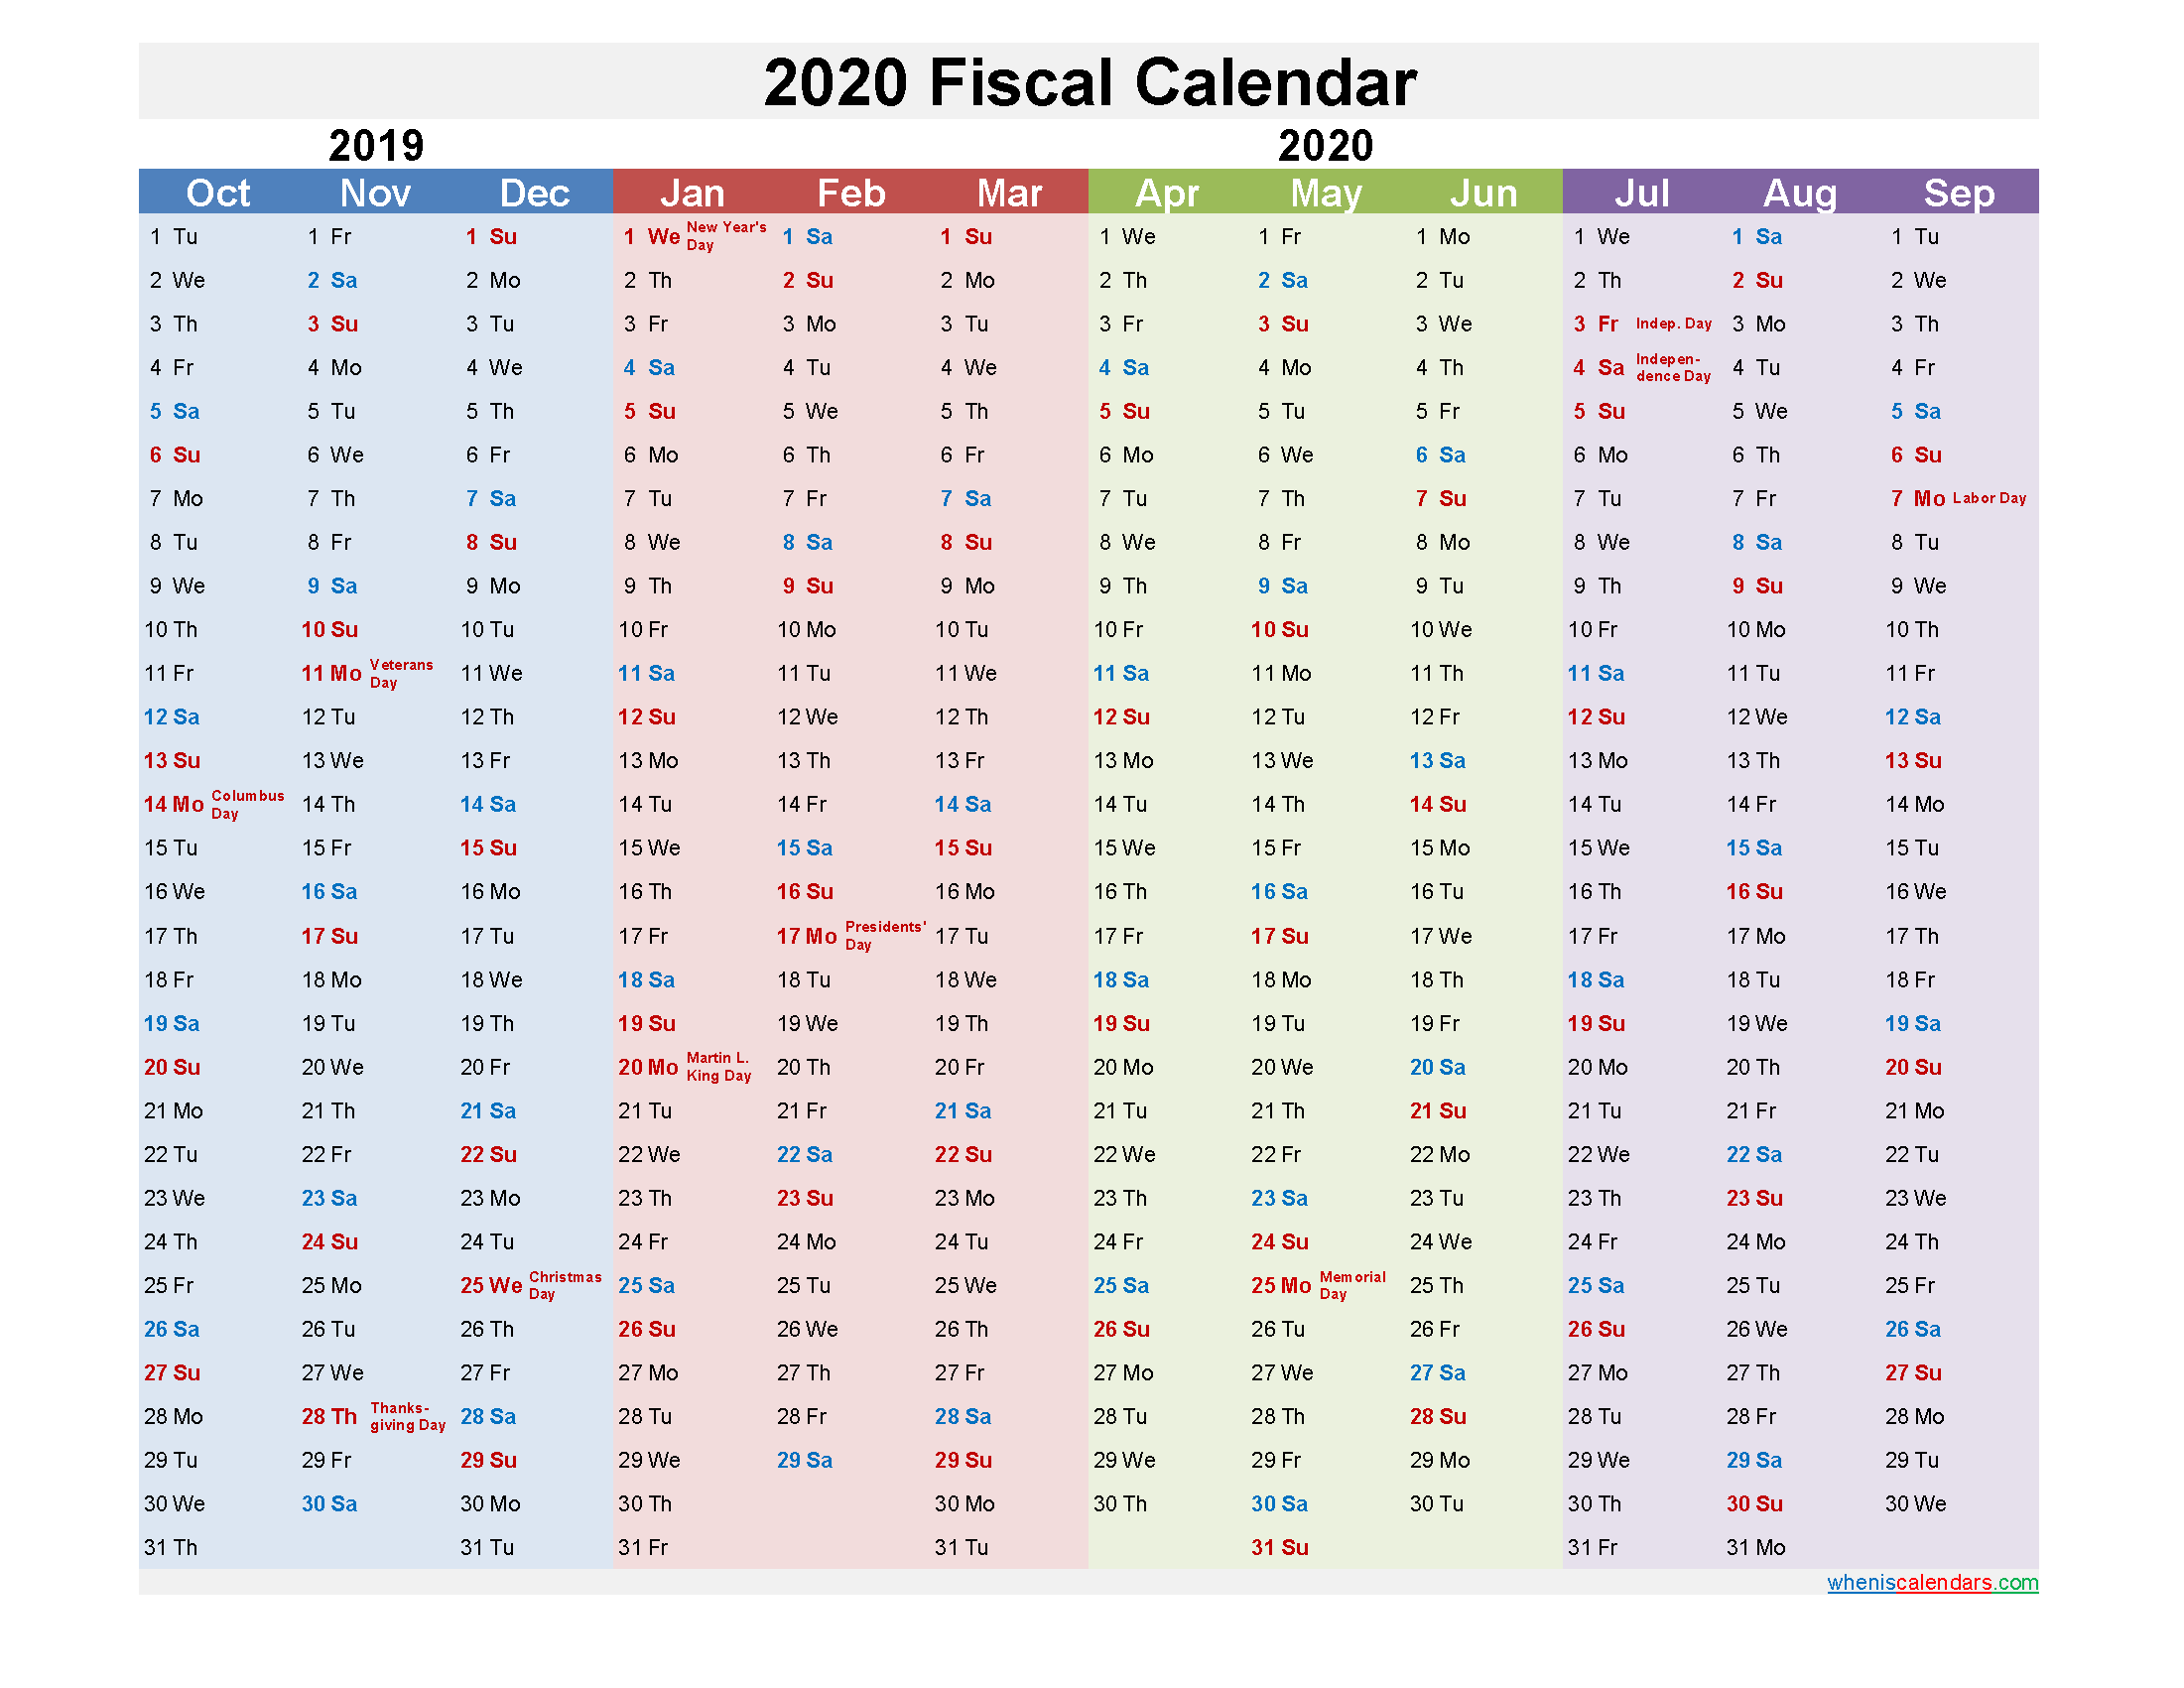 fiscal-calendar-2020-federal-fiscal-year-template-no-fiscal20y3